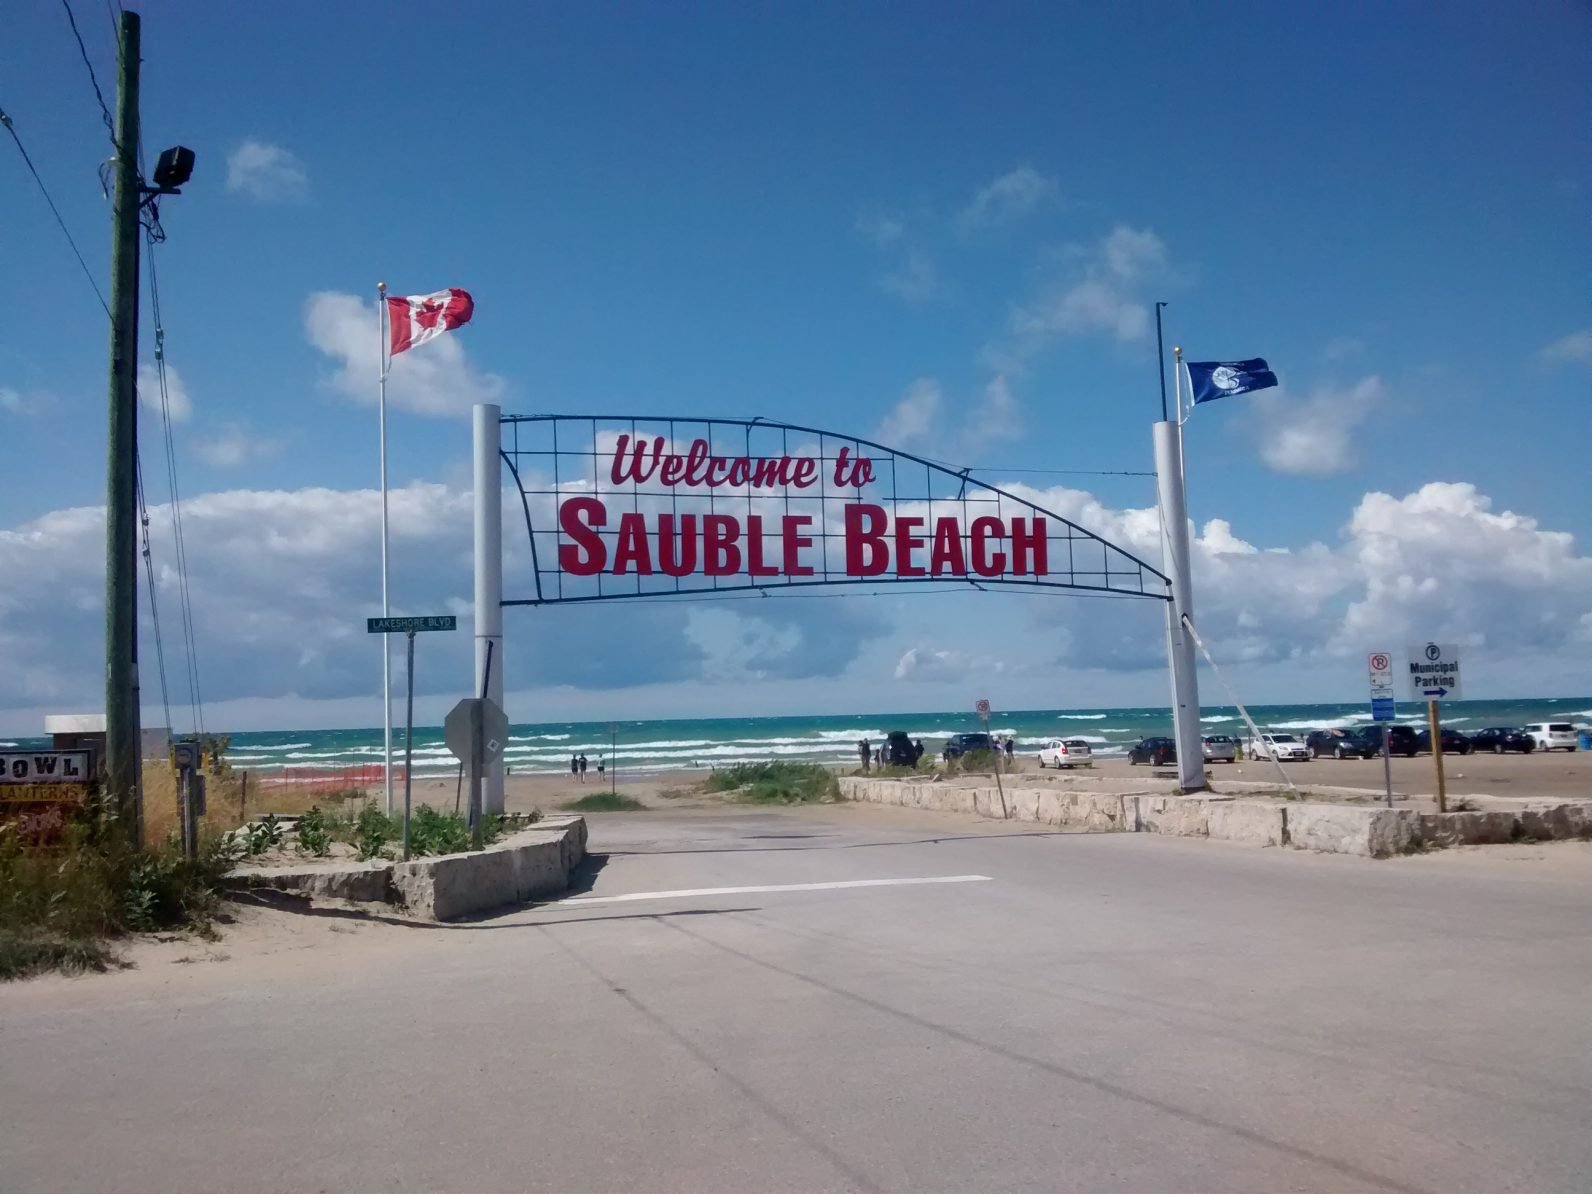 Sauble Beach welcome sign